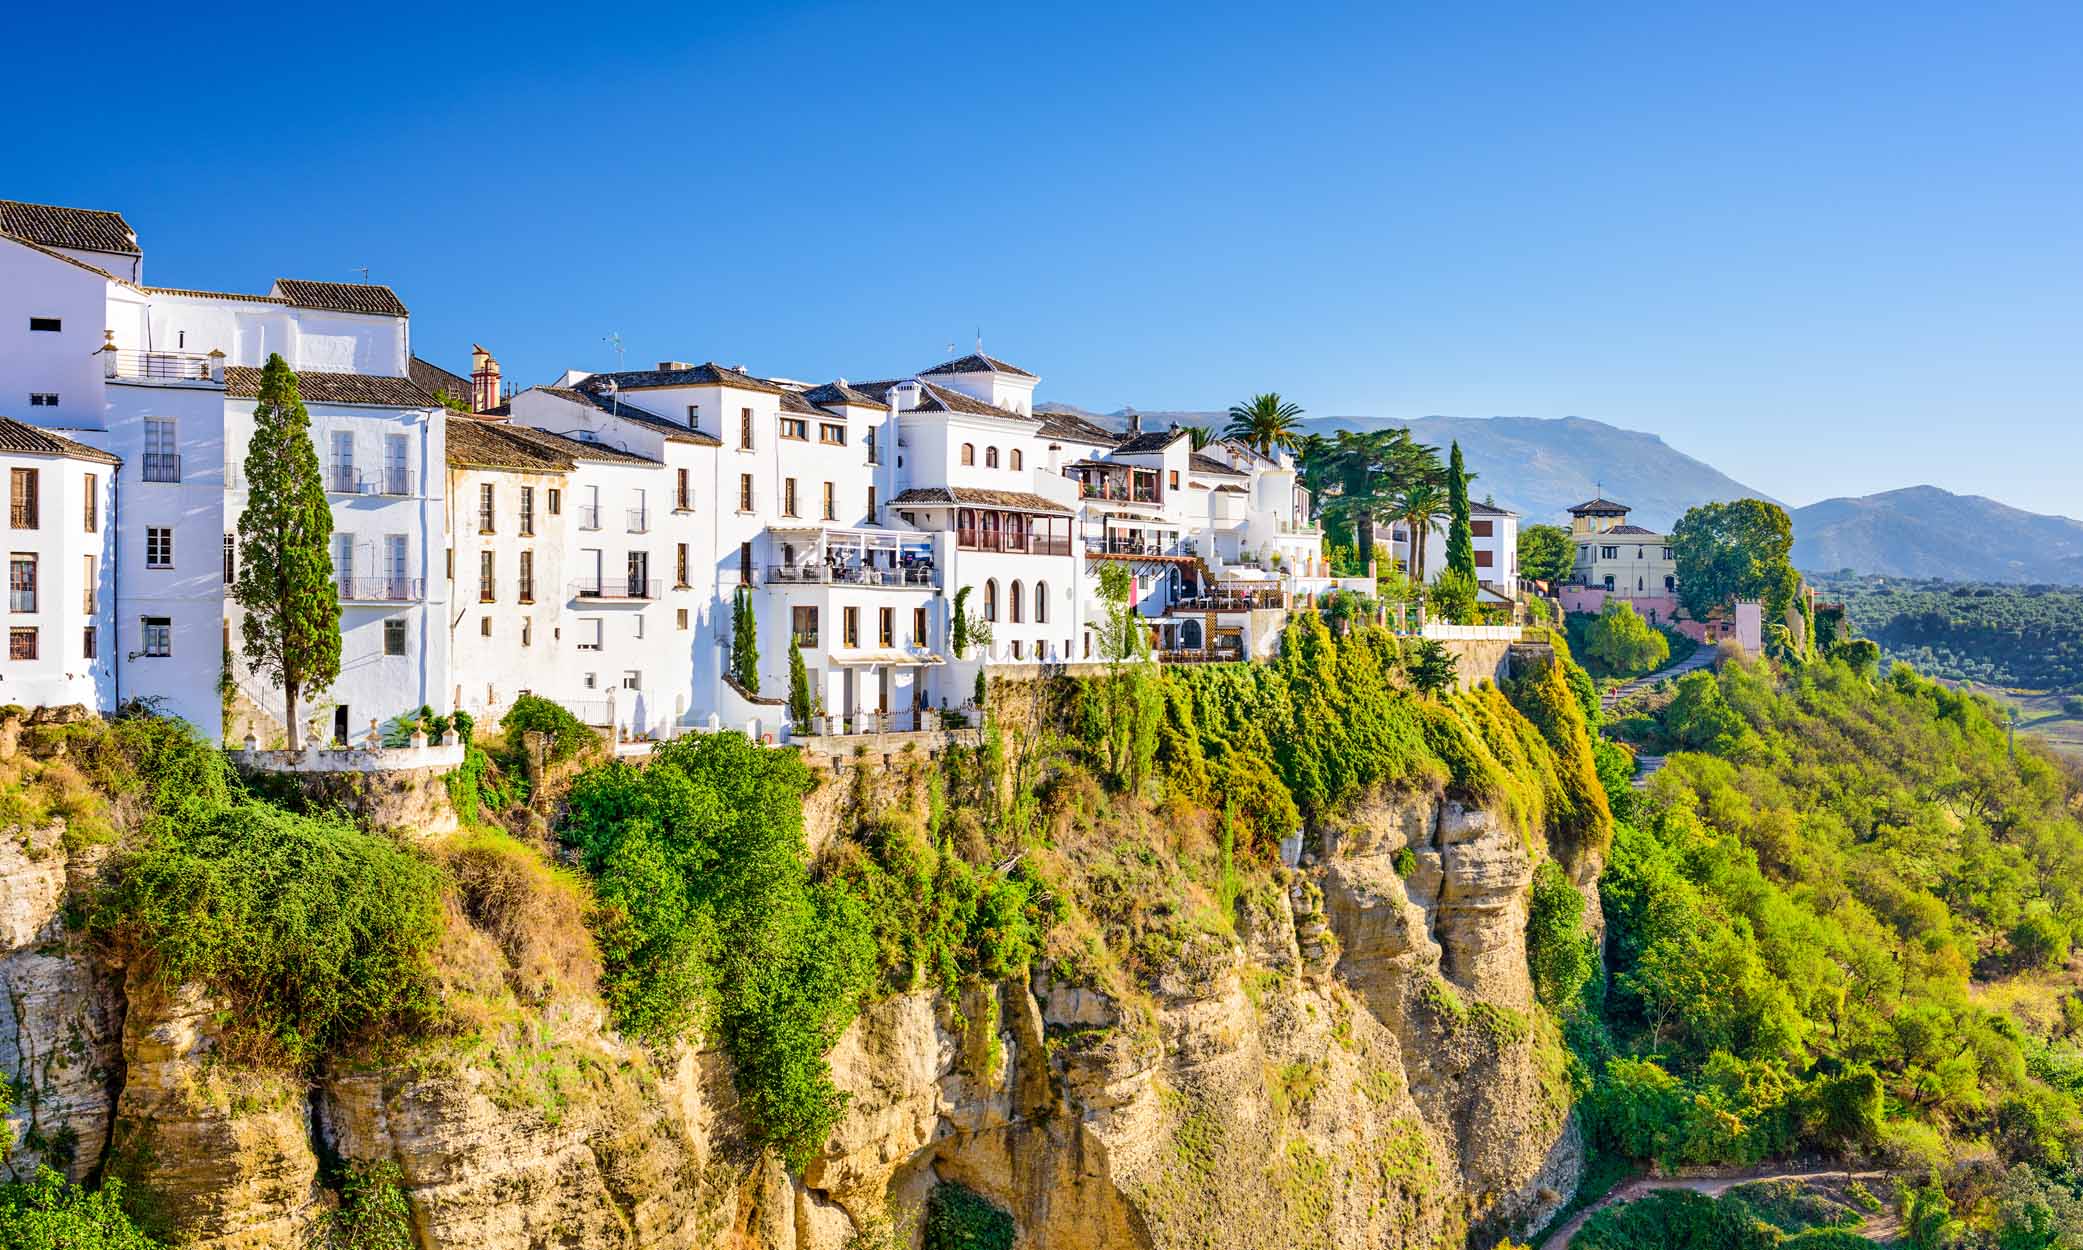 Buy Spanish real estate to qualify for a Golden Visa.